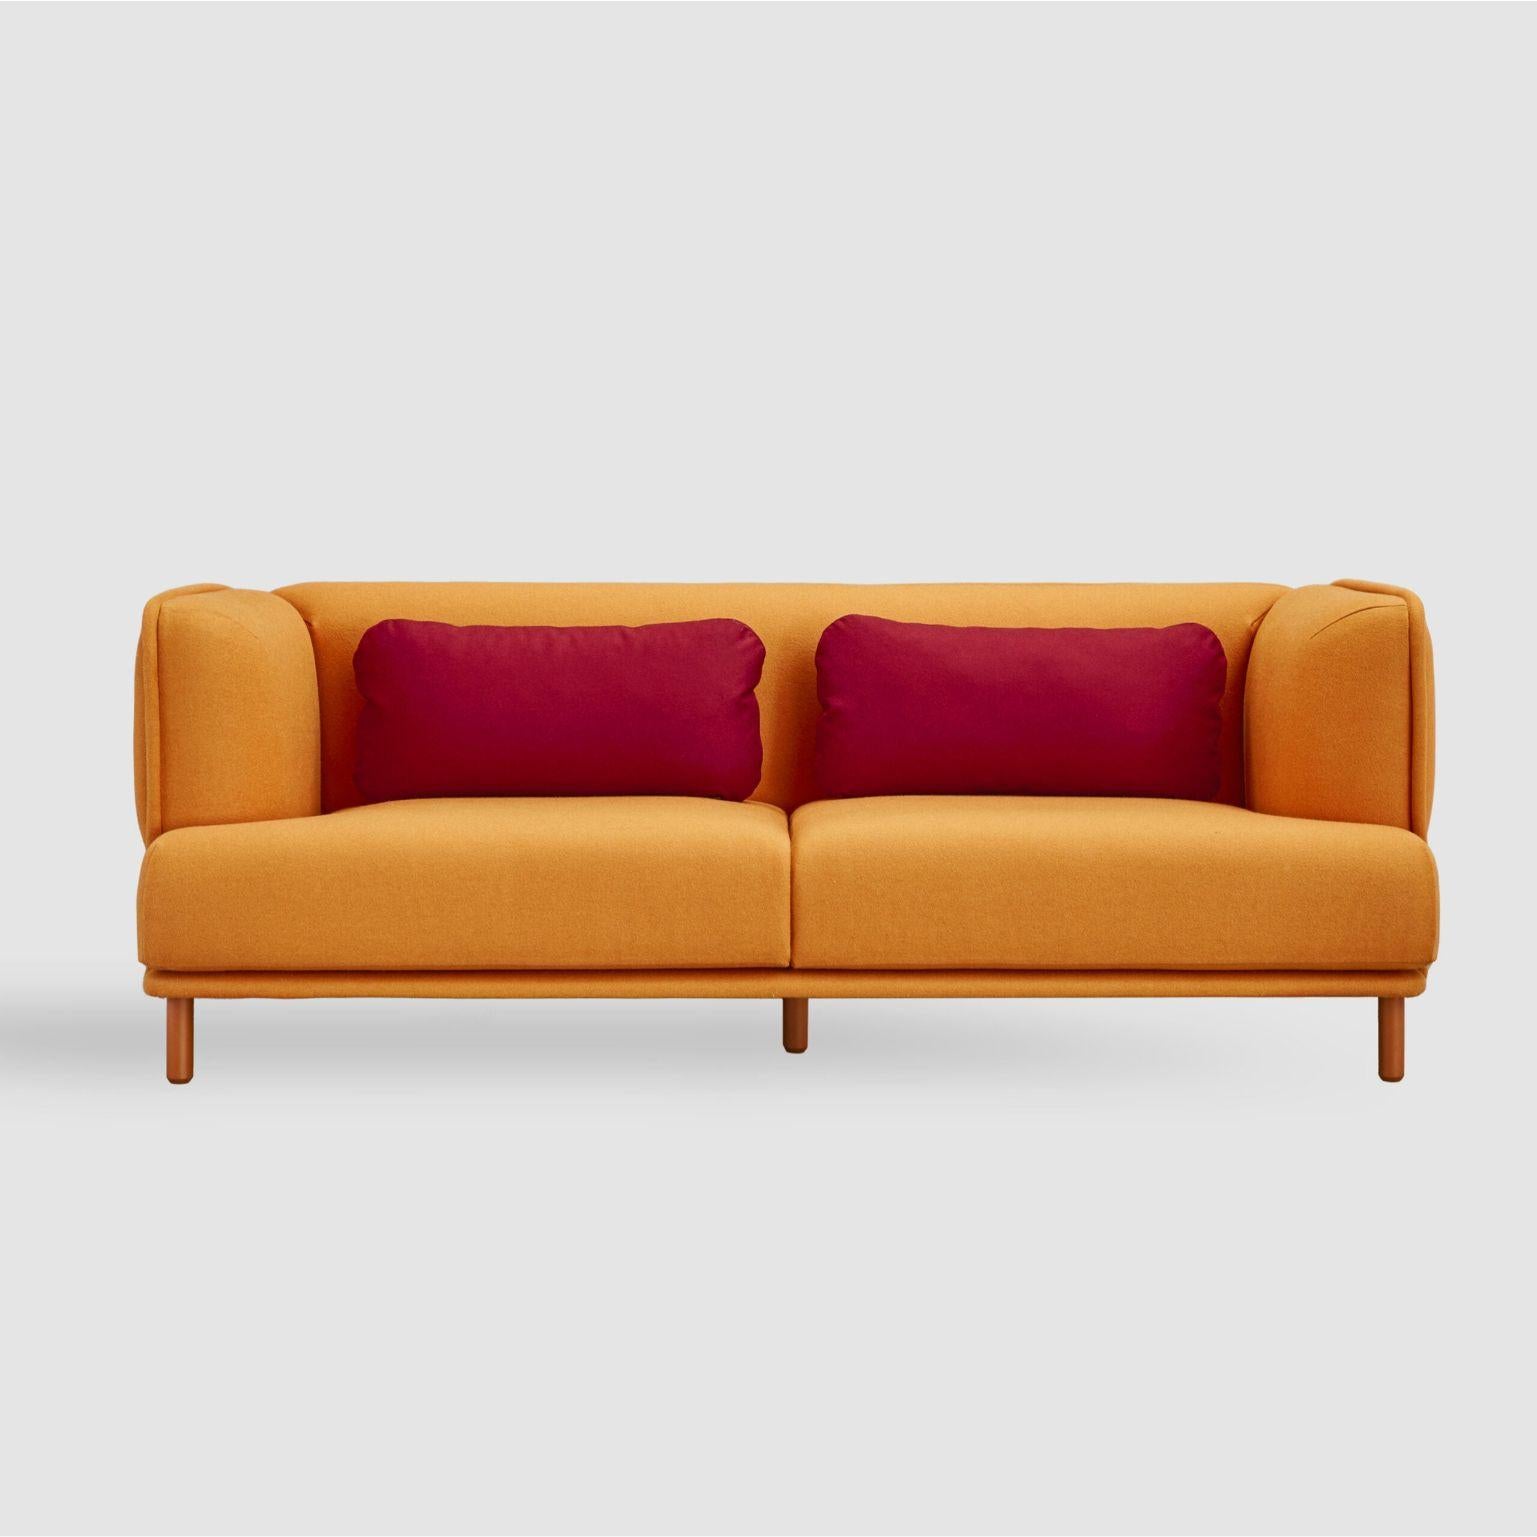 Hug sofa, 2 seaters by Pepe Albargues
Dimensions: W168, D95, H73, Seat43
Materials: Pine wood structure reinforced with plywood and tablex
Backrest is 50% goose feather and 50% polyester fibre
Foam CMHR (high resilience and flame retardant) for